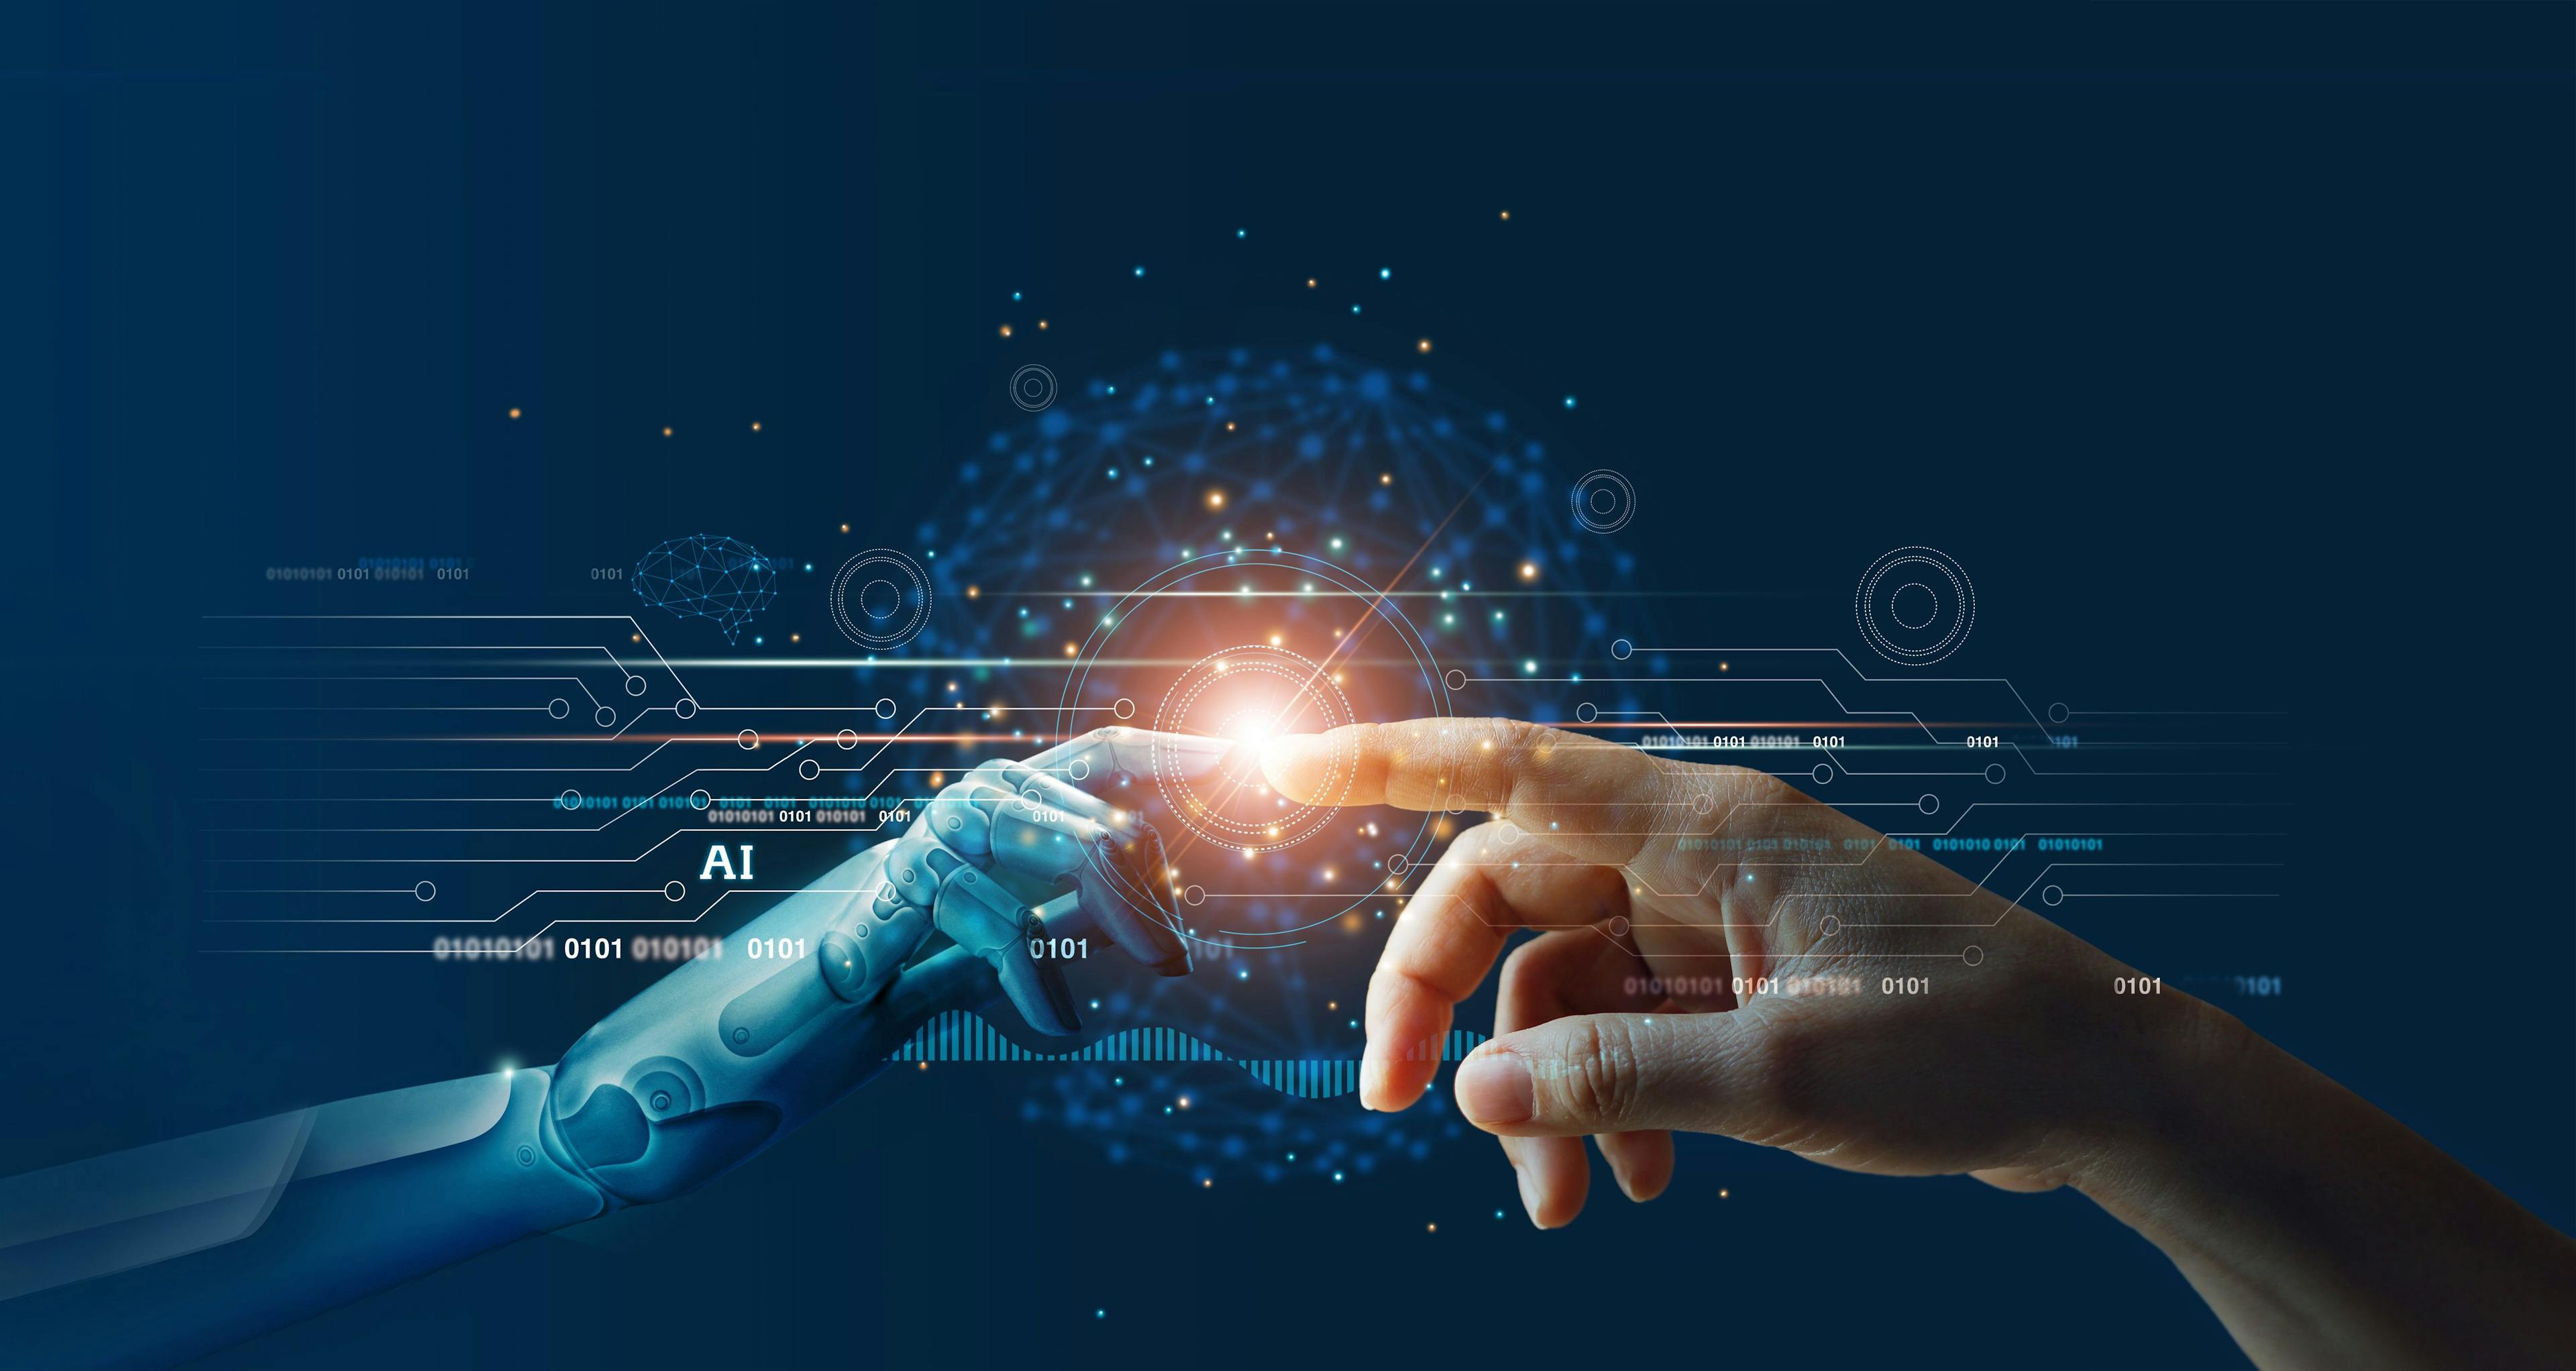 AI, Machine learning, Hands of robot and human touching on big data network connection background, Science and artificial intelligence technology, innovation and futuristic | Image Credit: © ipopba - stock.adobe.com 